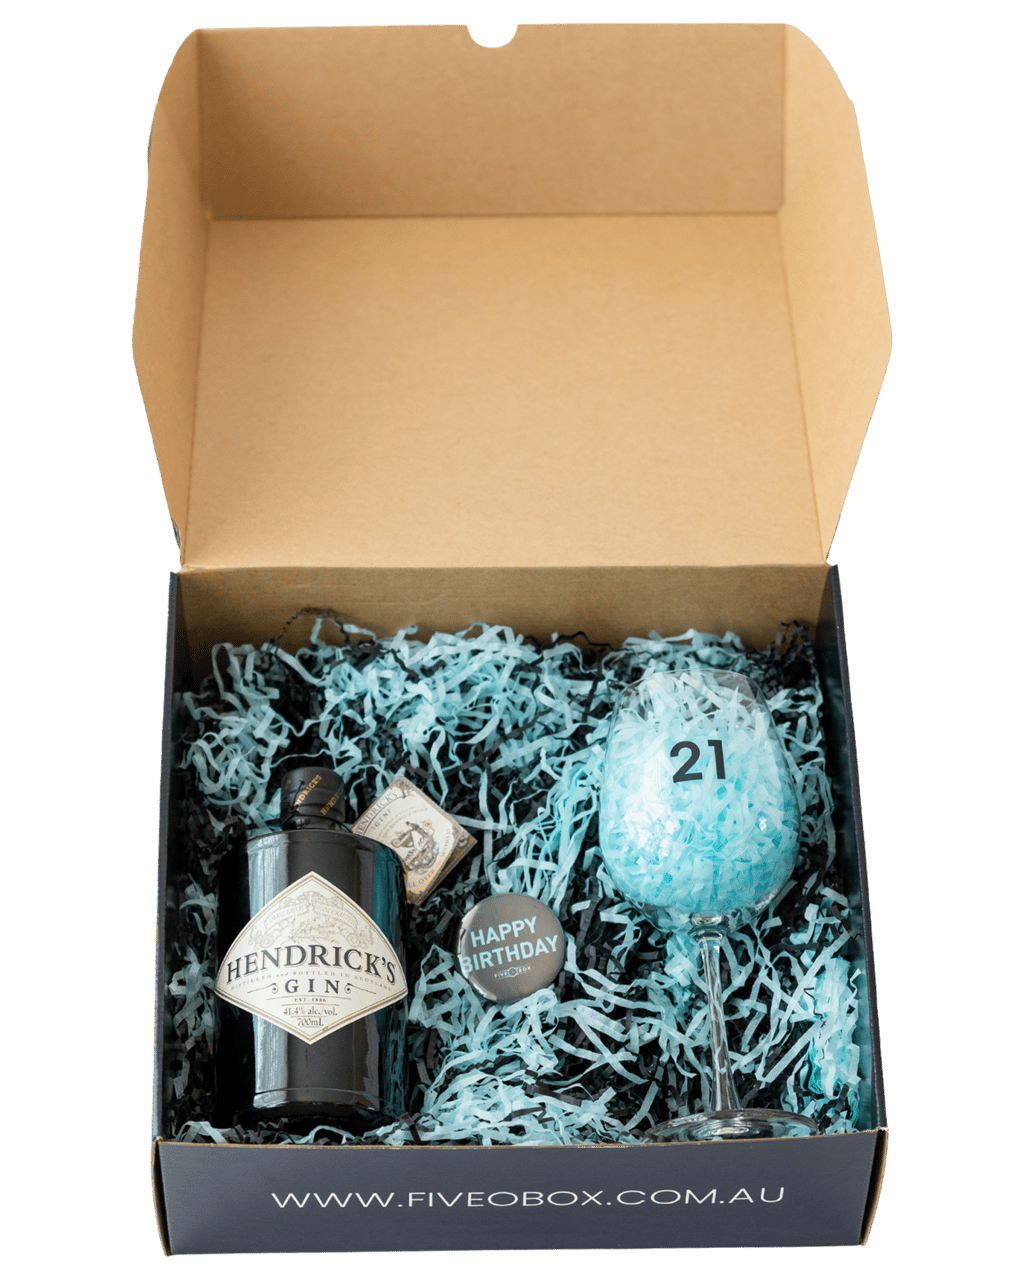 Five O'box Gin Lover's 21st Birthday Gift Box - Hendrick's Gin (Unbeatable  Prices): Buy Online @Best Deals with Delivery - Dan Murphy's